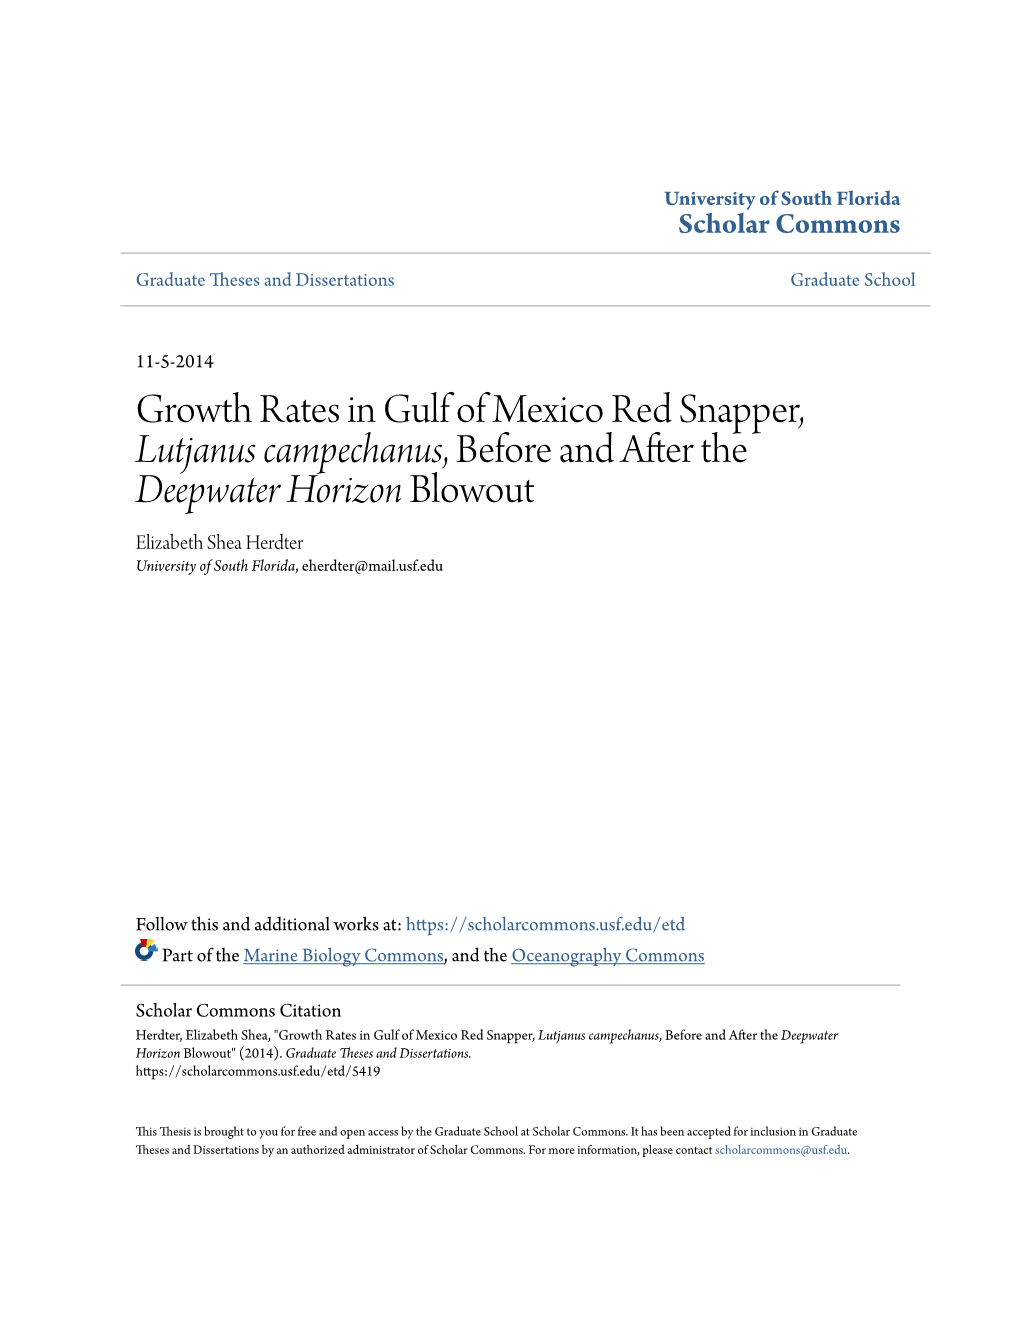 Growth Rates in Gulf of Mexico Red Snapper, Lutjanus Campechanus